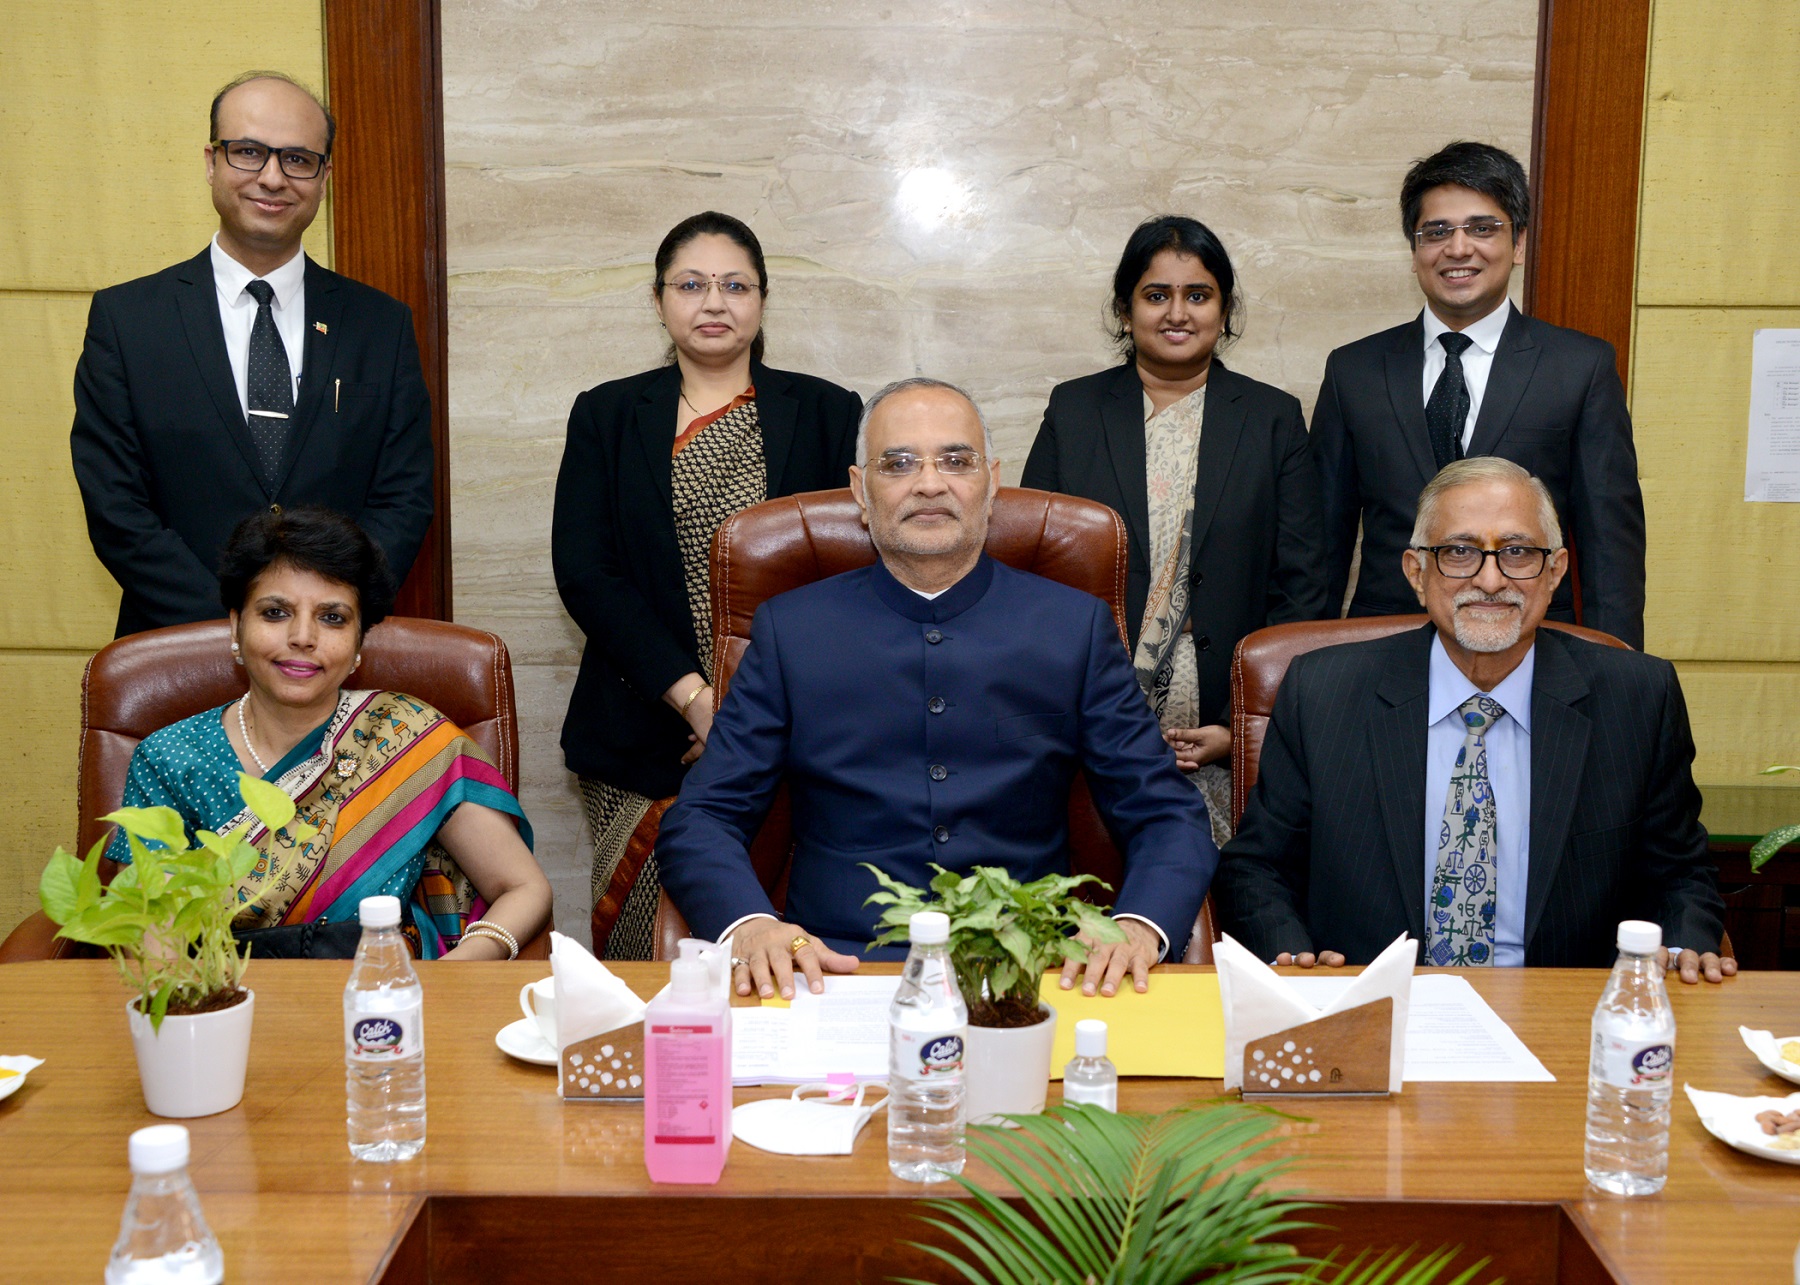 Visit of Hon’ble Chief Justice of Delhi High Court